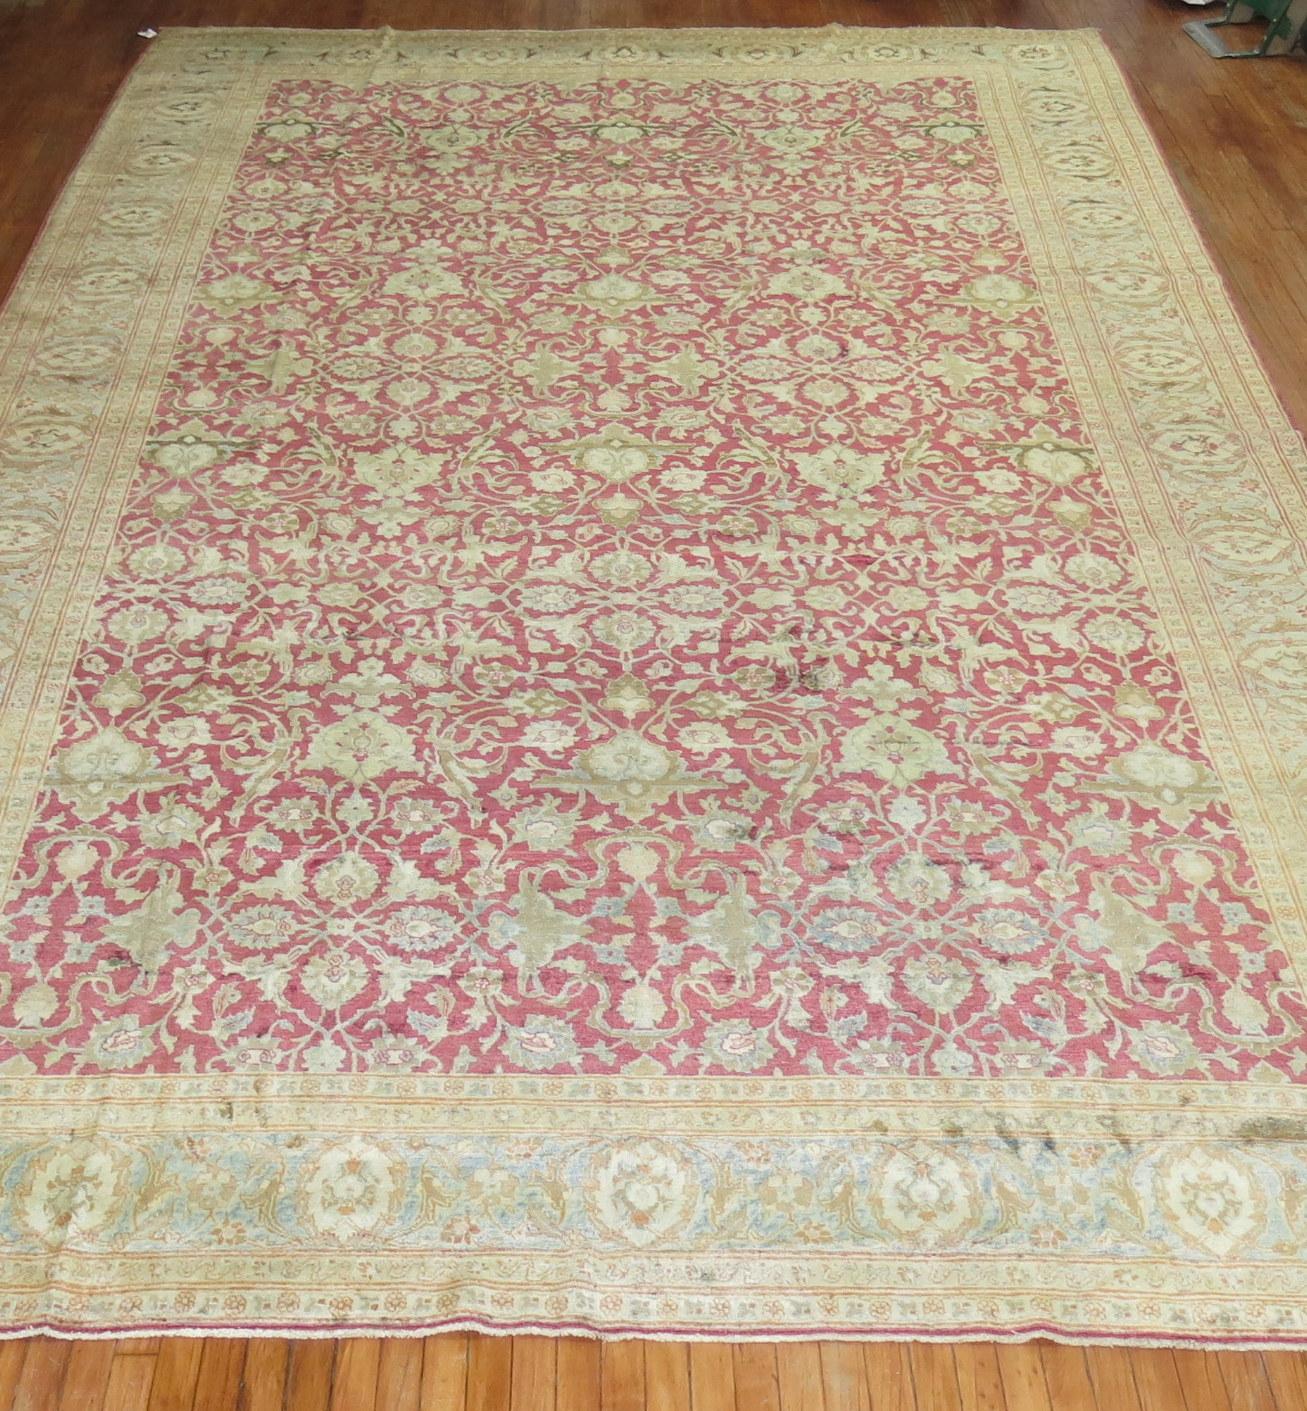 Raspberry Icy Blue Oversize Persian Tabriz Rug, Early 20th Century For Sale 4